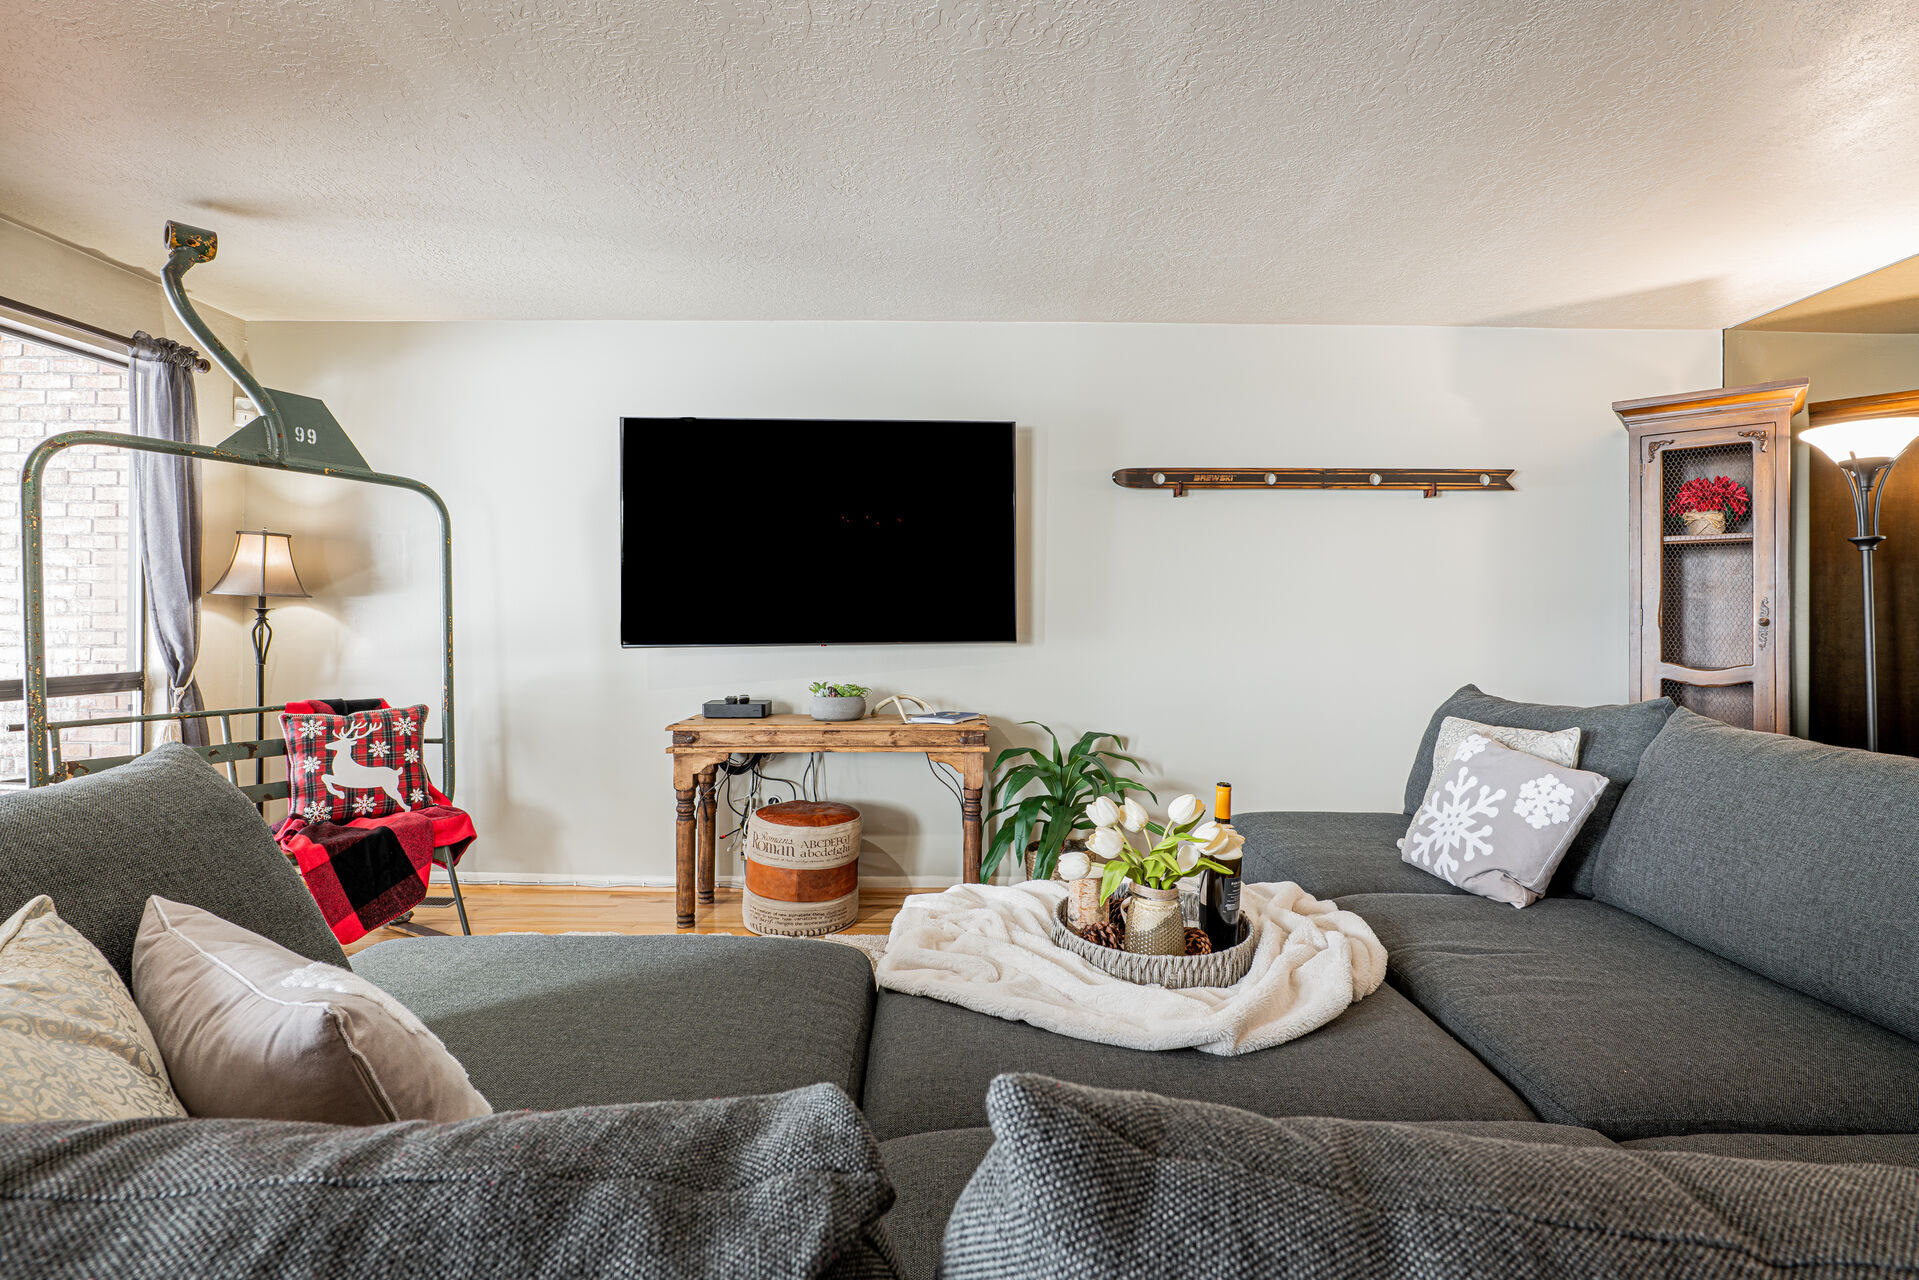 Main Level Living Room with  plush sectional, a warm wood-burning fireplace, Smart TV, and your very own chairlift